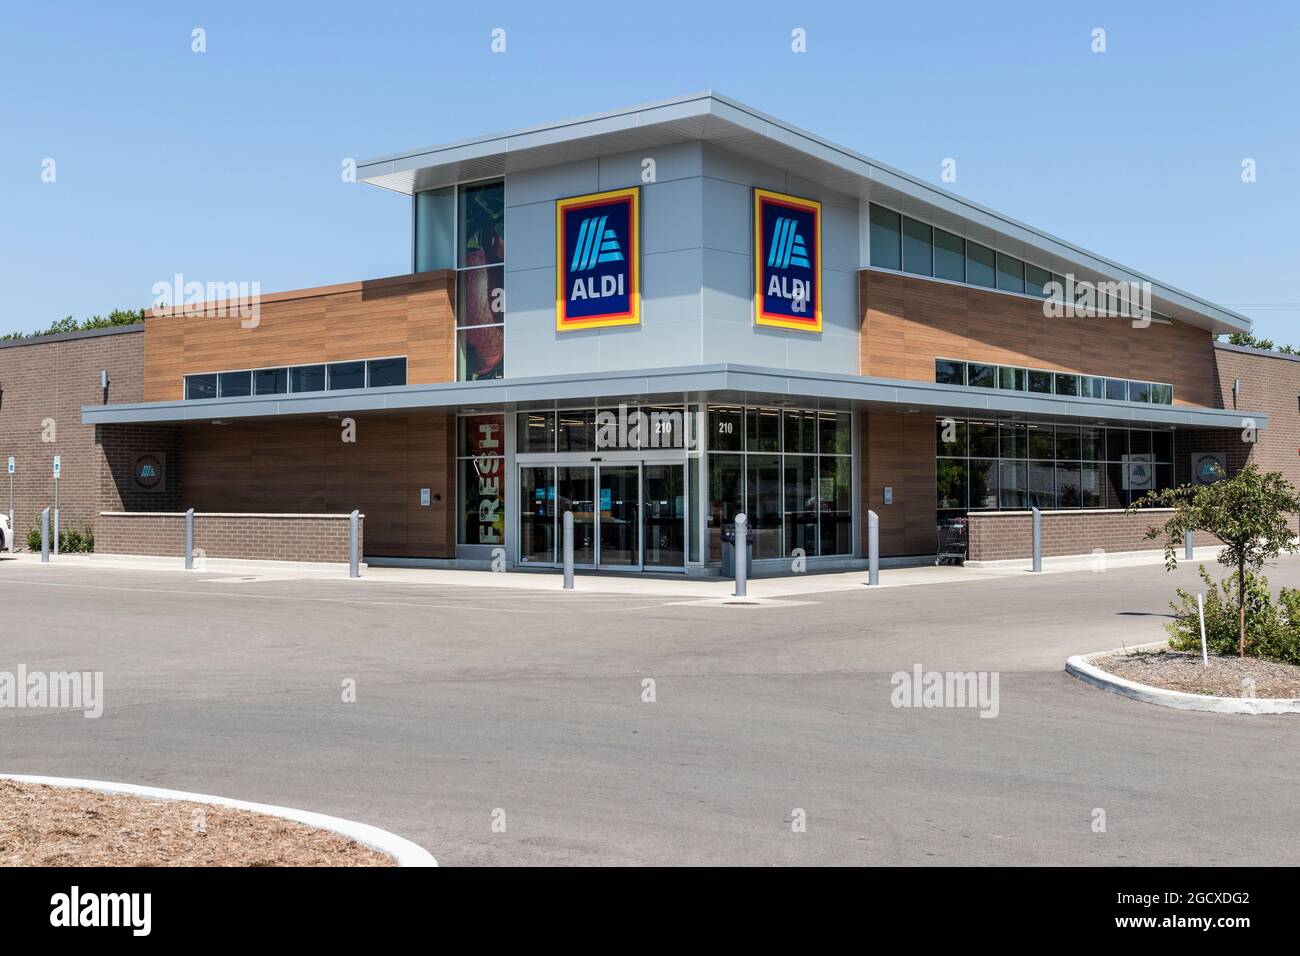 Muncie - Circa August 2021: Aldi Discount Supermarket. Aldi sells a range of grocery items, including produce, meat and dairy at discount prices. Stock Photo